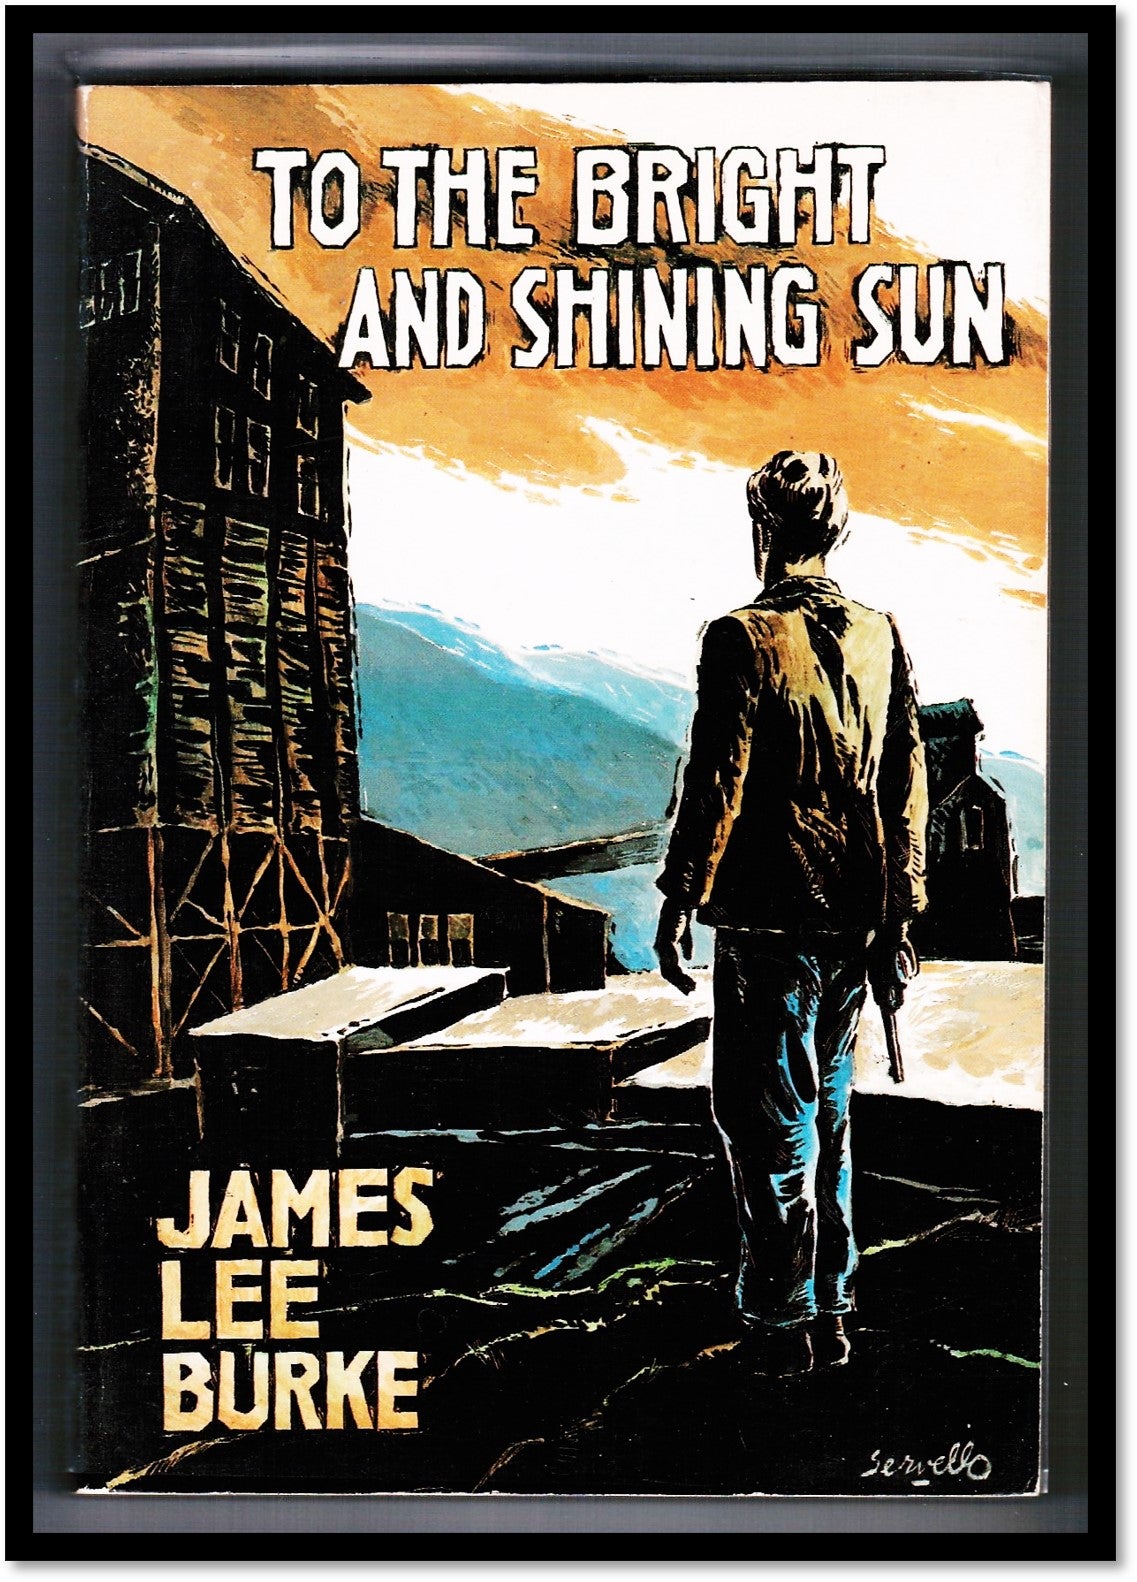 Edition.　Shinning　and　Bright　The　To　Paperback　March　Burke　First　Lee　Sun　in　James　First　published　1989